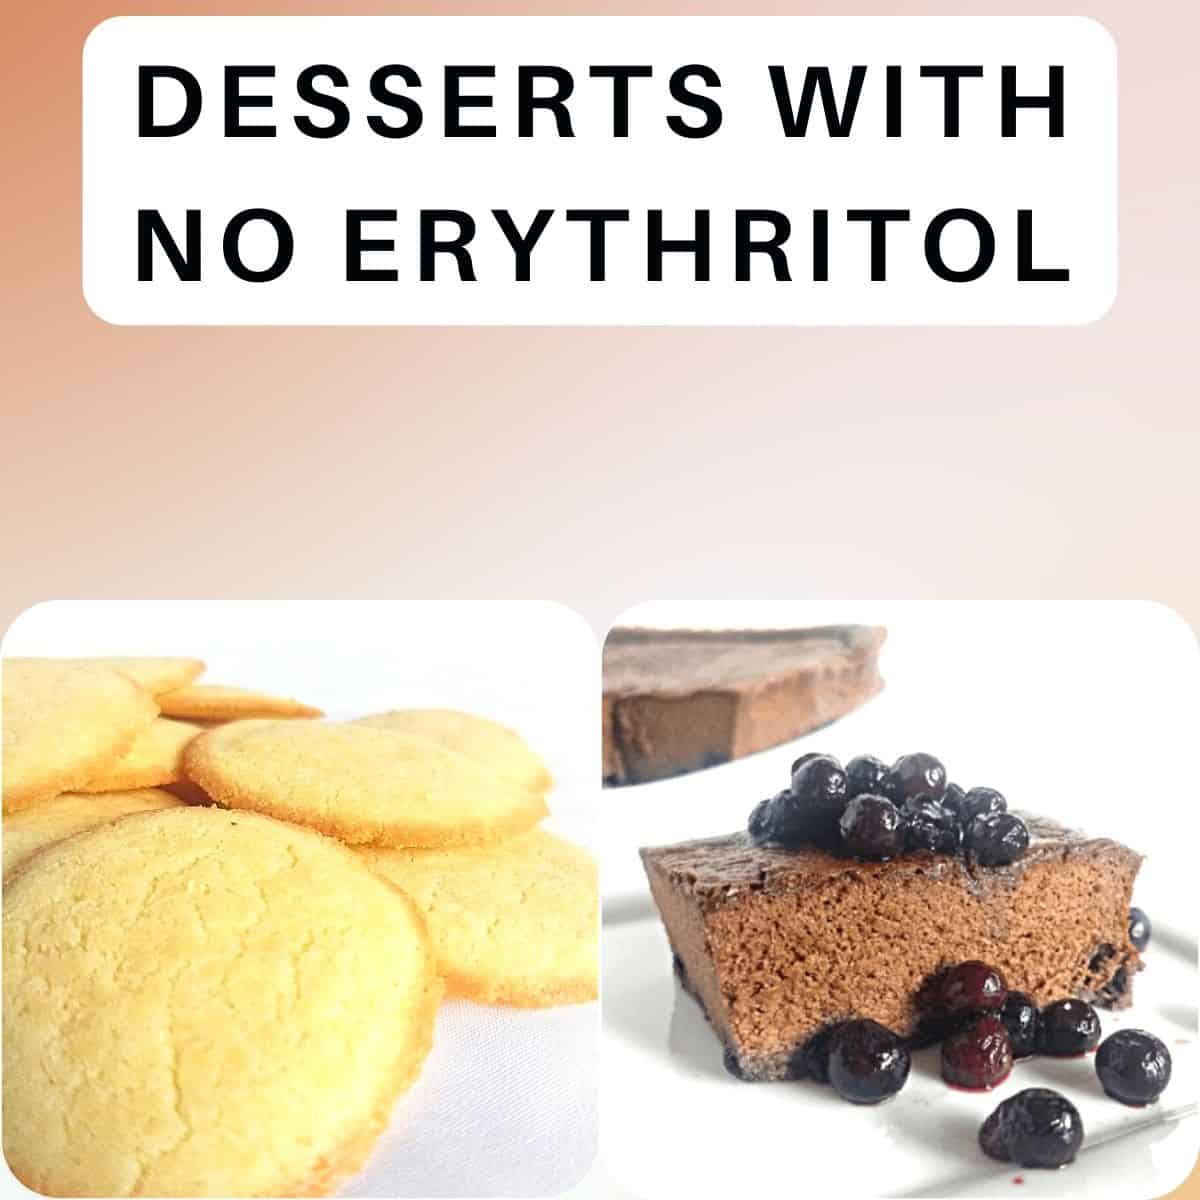 Featured Image - 21Keto and Low-Carb Desserts Without Erythritol